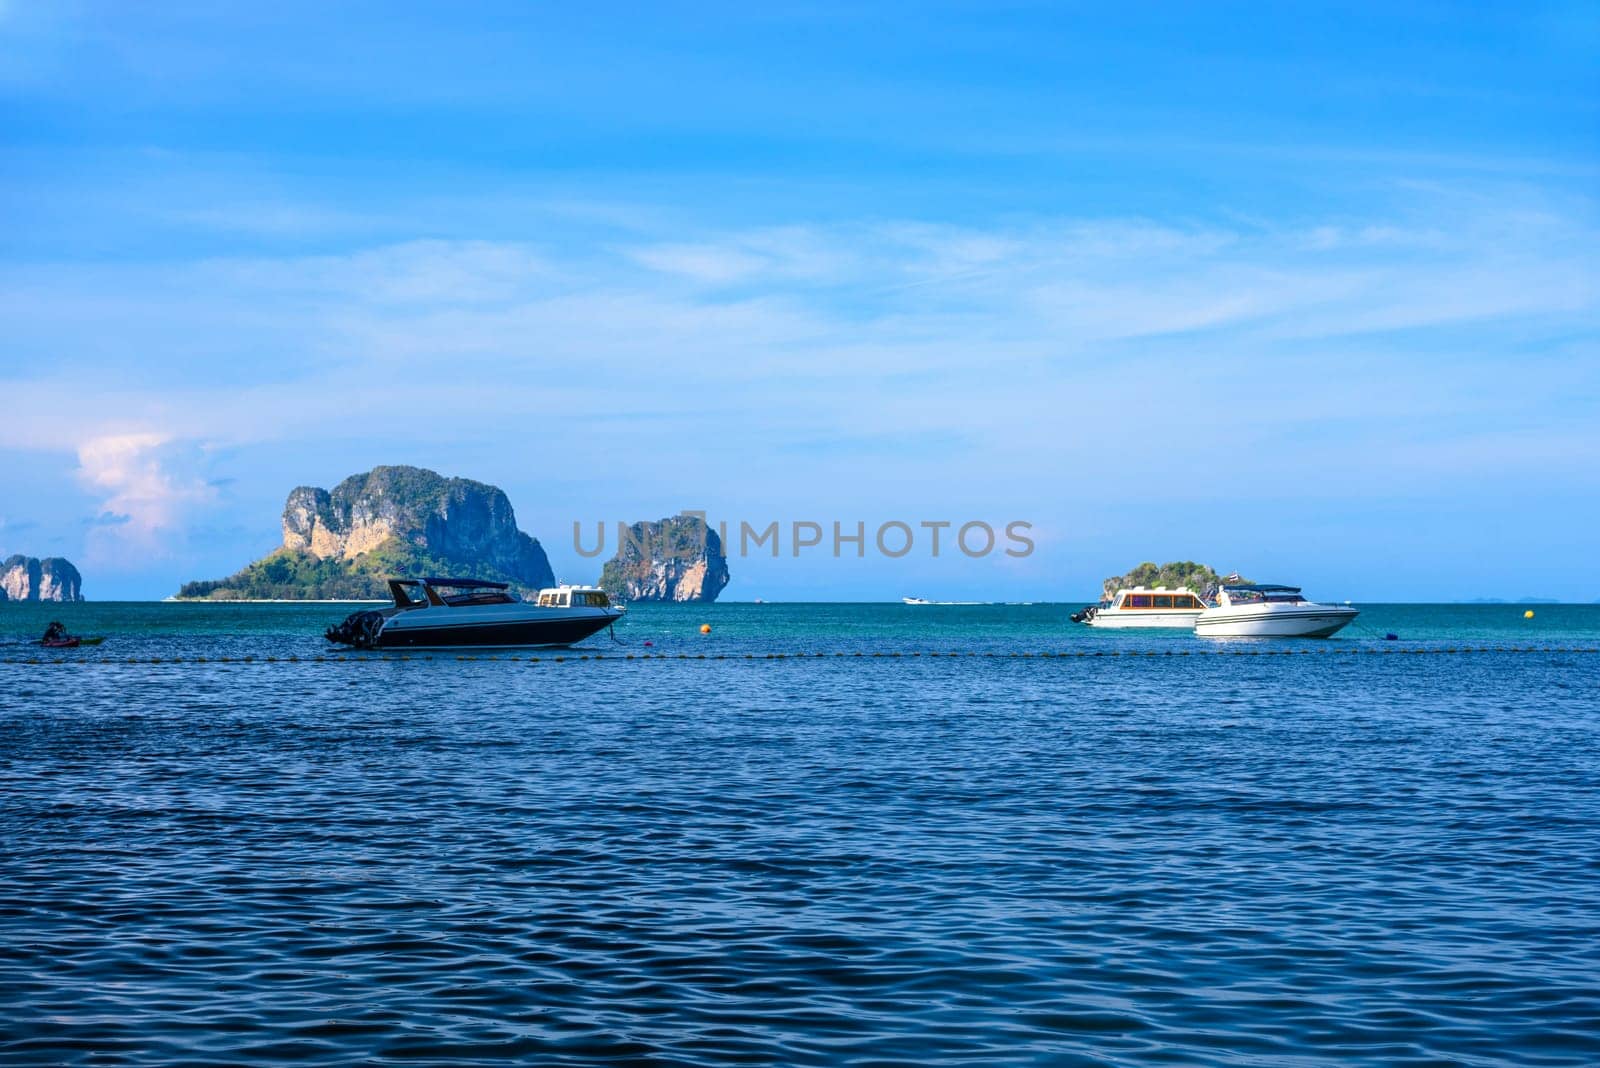 Speed boats in the sea with cliff rocks in the background, Ao Phra Nang Beach, Ao Nang, Krabi, Thailand by Eagle2308